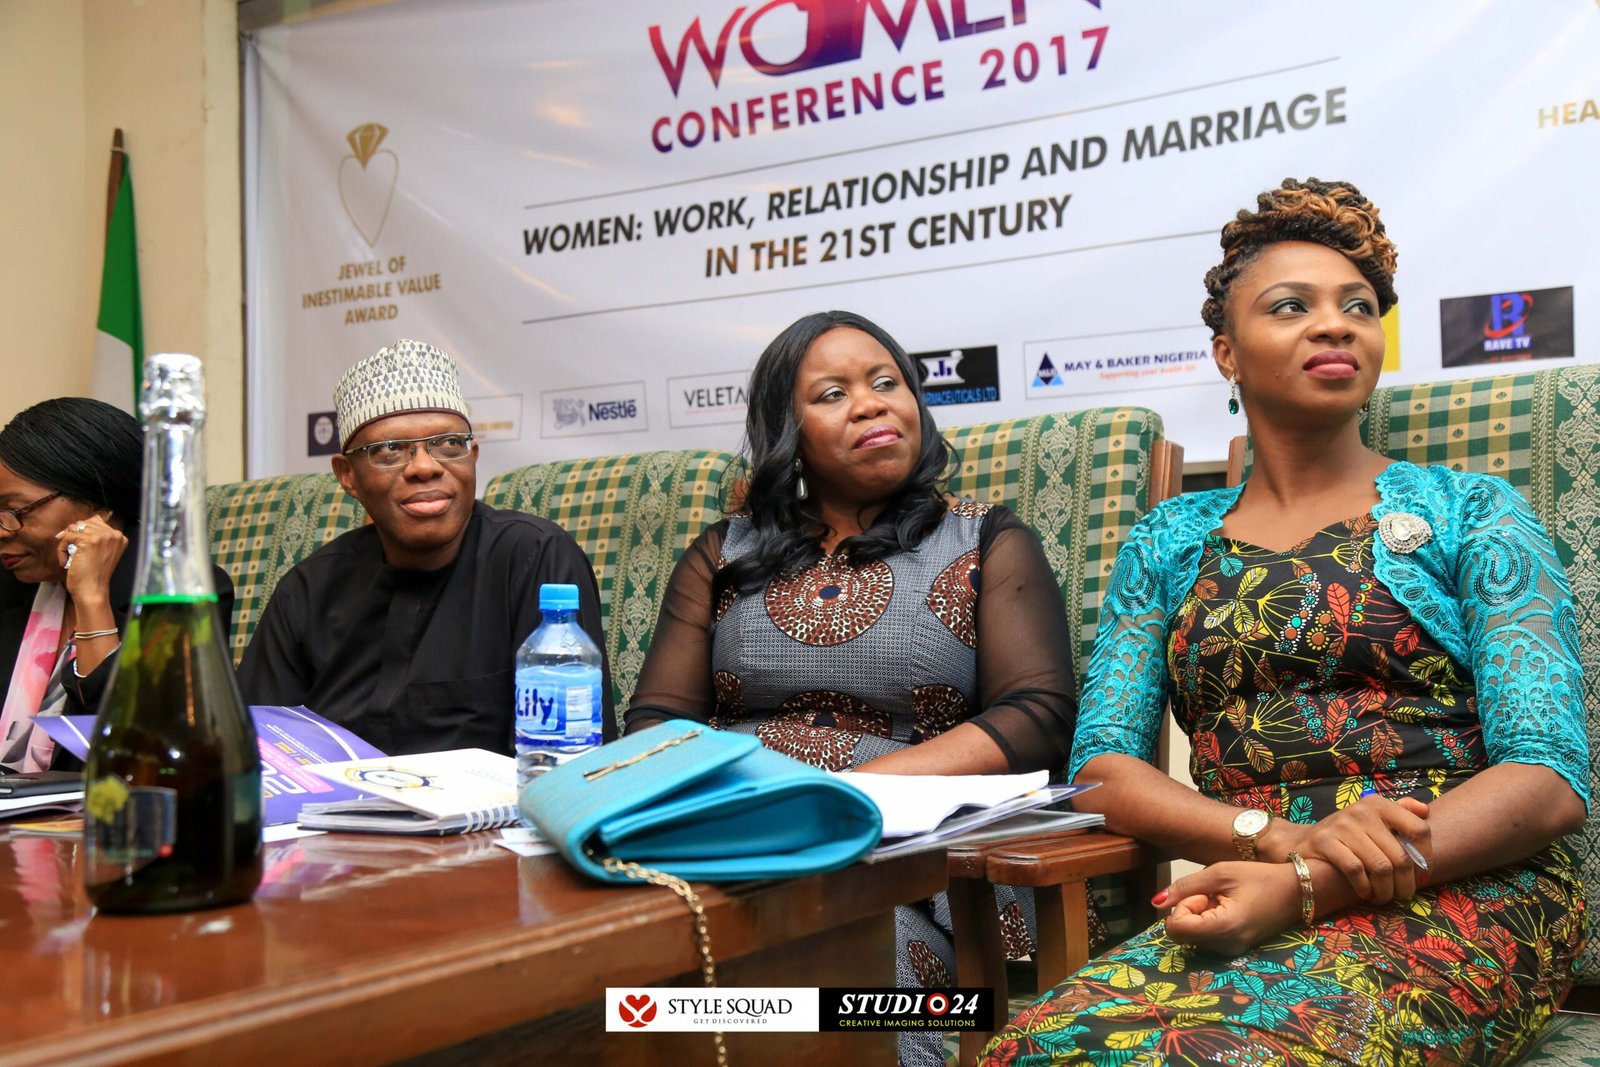 Pride Women Conference 2017 work women and marriage in the 21st century, building a female brand, female empowerment and development in Nigeria, SDGs goal 5, sound mental health and well being among women in Nigeria, Barrister Nneka Ezeani, Dr Sylva Ashimole, Rosemary Onyebigwa